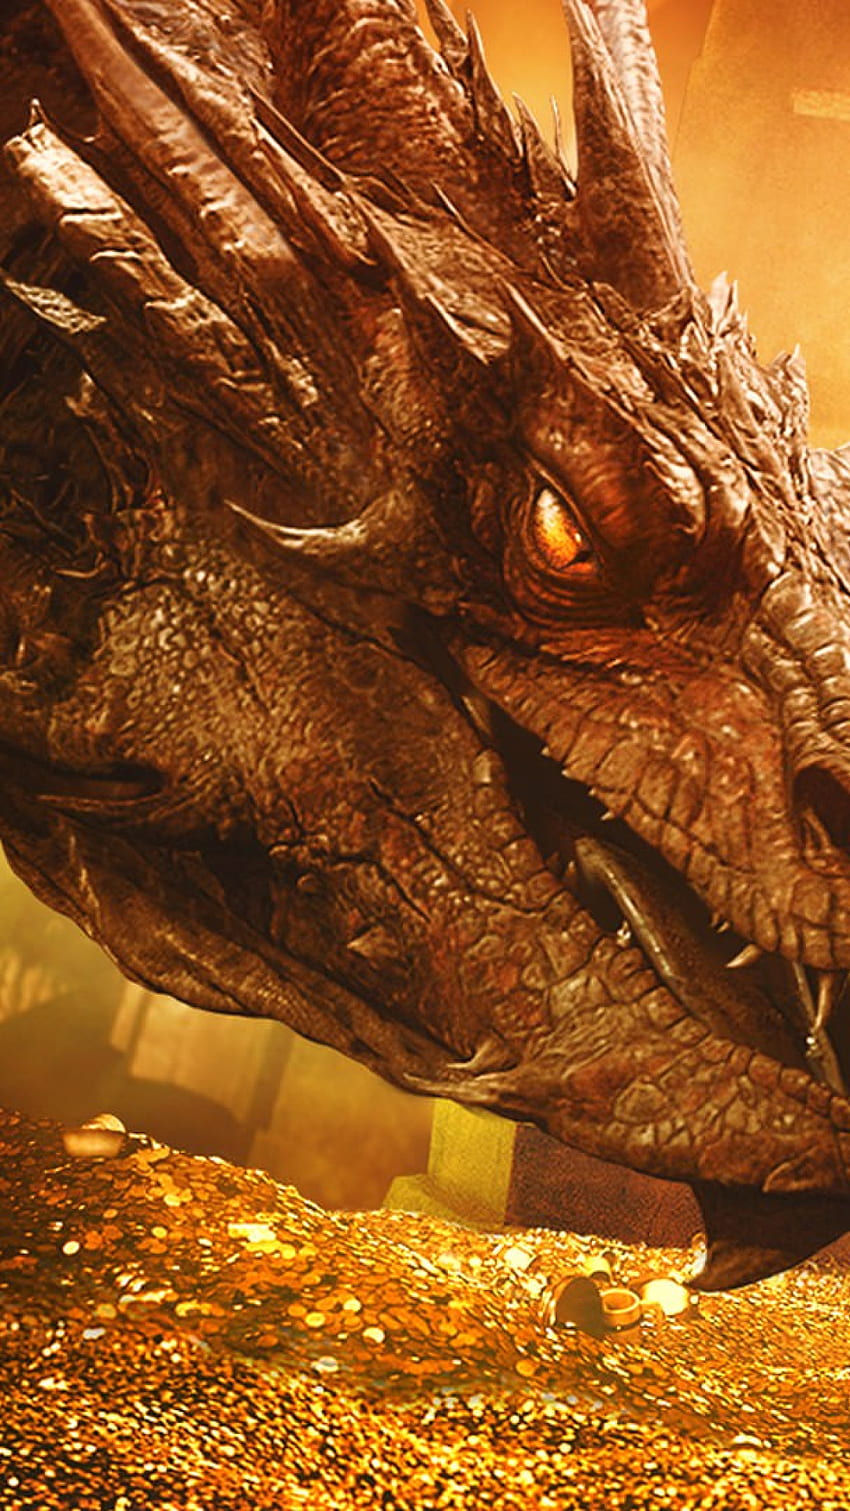 Smaug iPhone Dragin In The Hobbit The Desolation - Smaug -、The Desolation of Smaug HD電話の壁紙